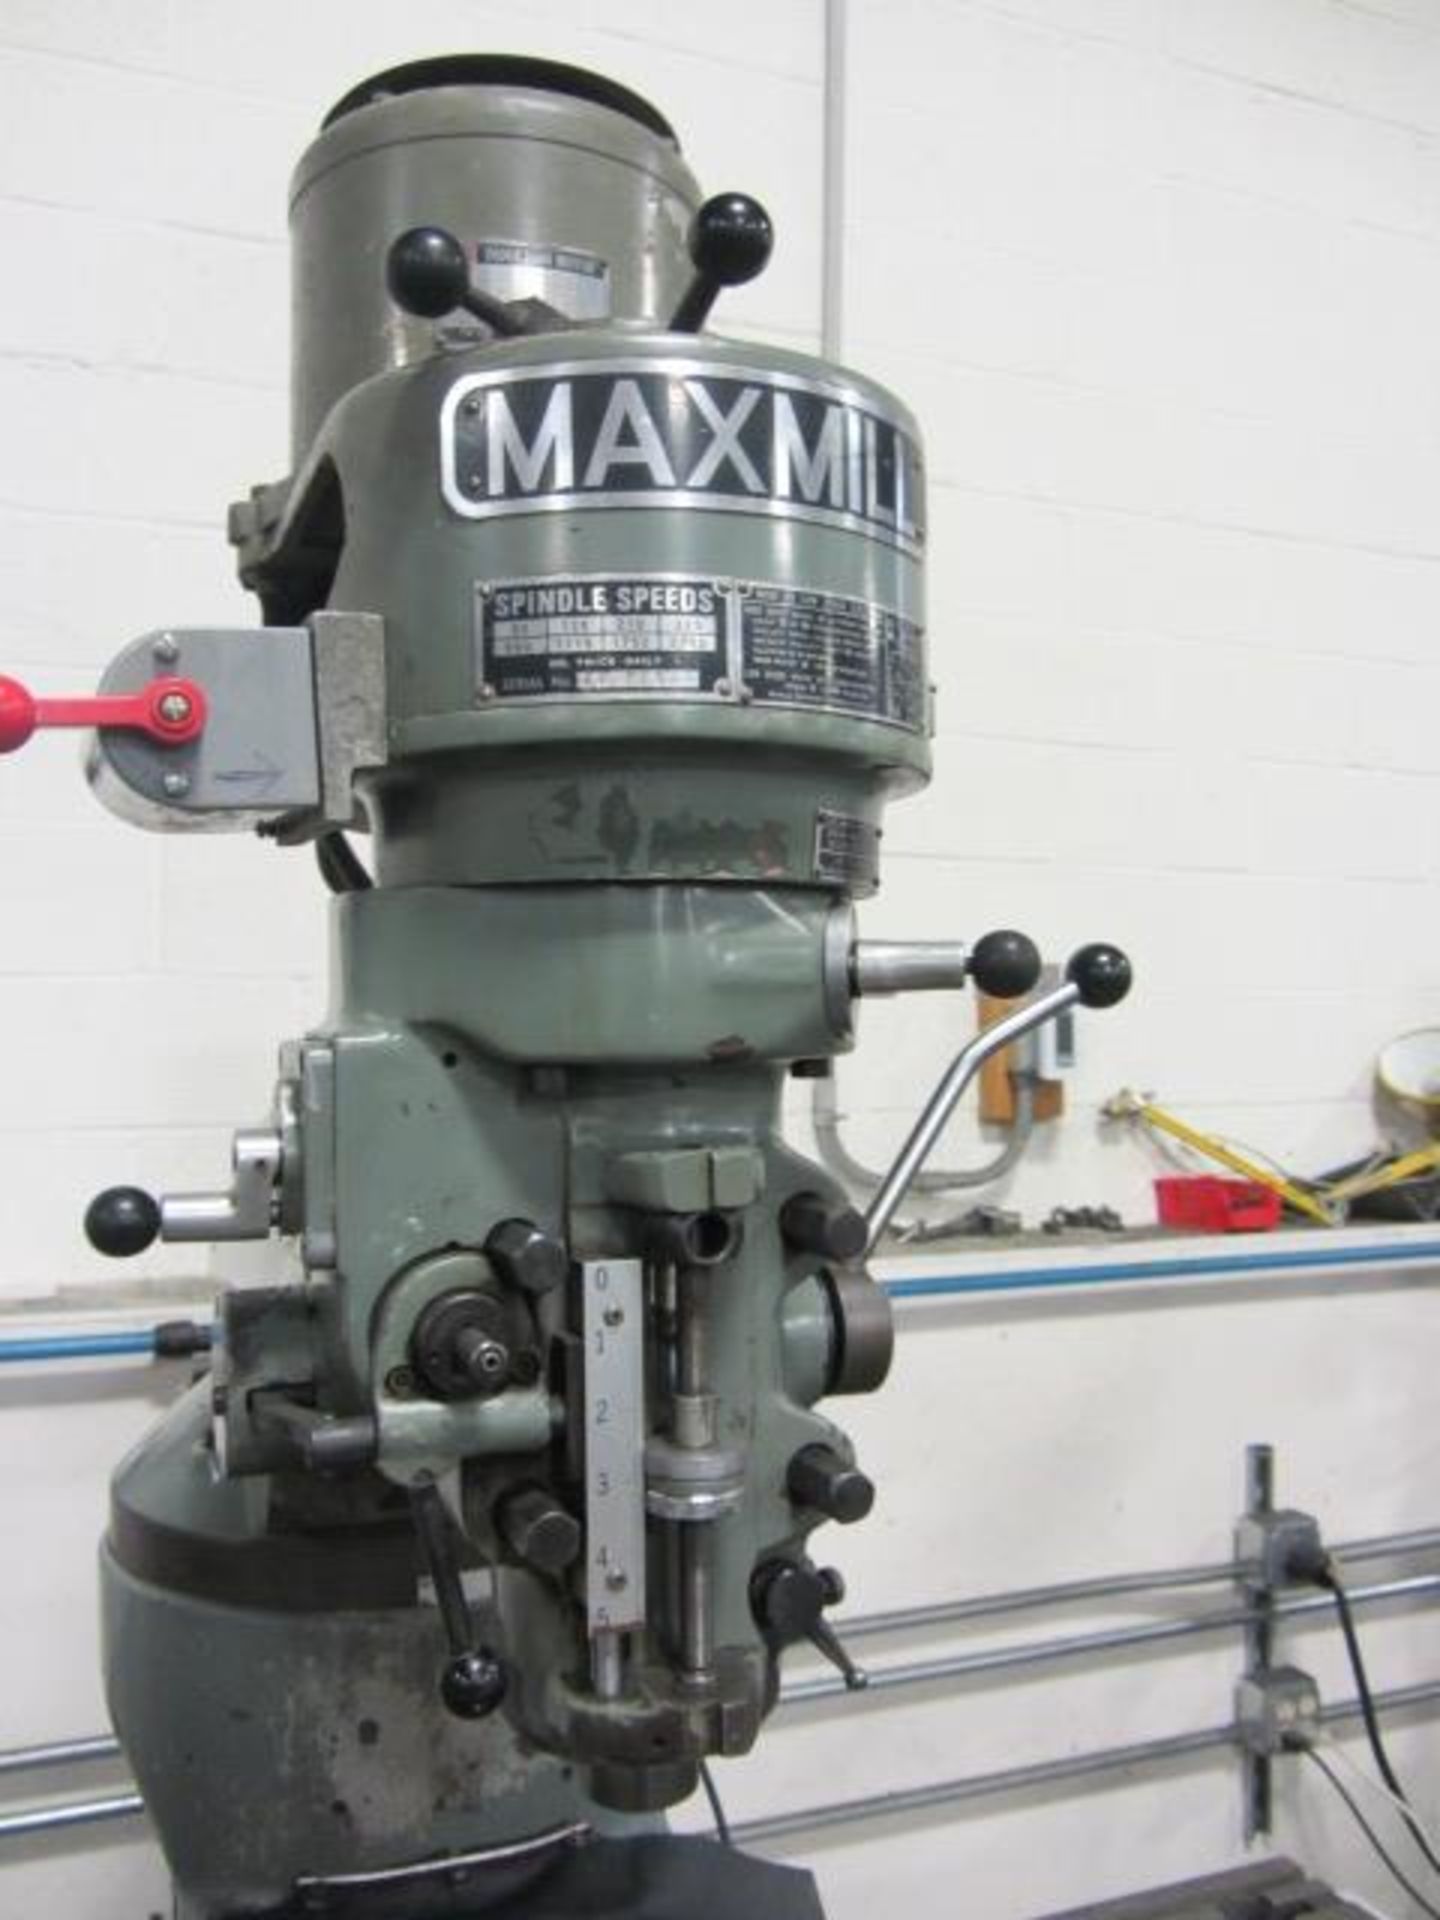 Maxmill Vertical Milling Machine with 9'' x 42'' Power Feed Table, R-8 Spindle Speeds to 2720 RPM, - Image 5 of 6